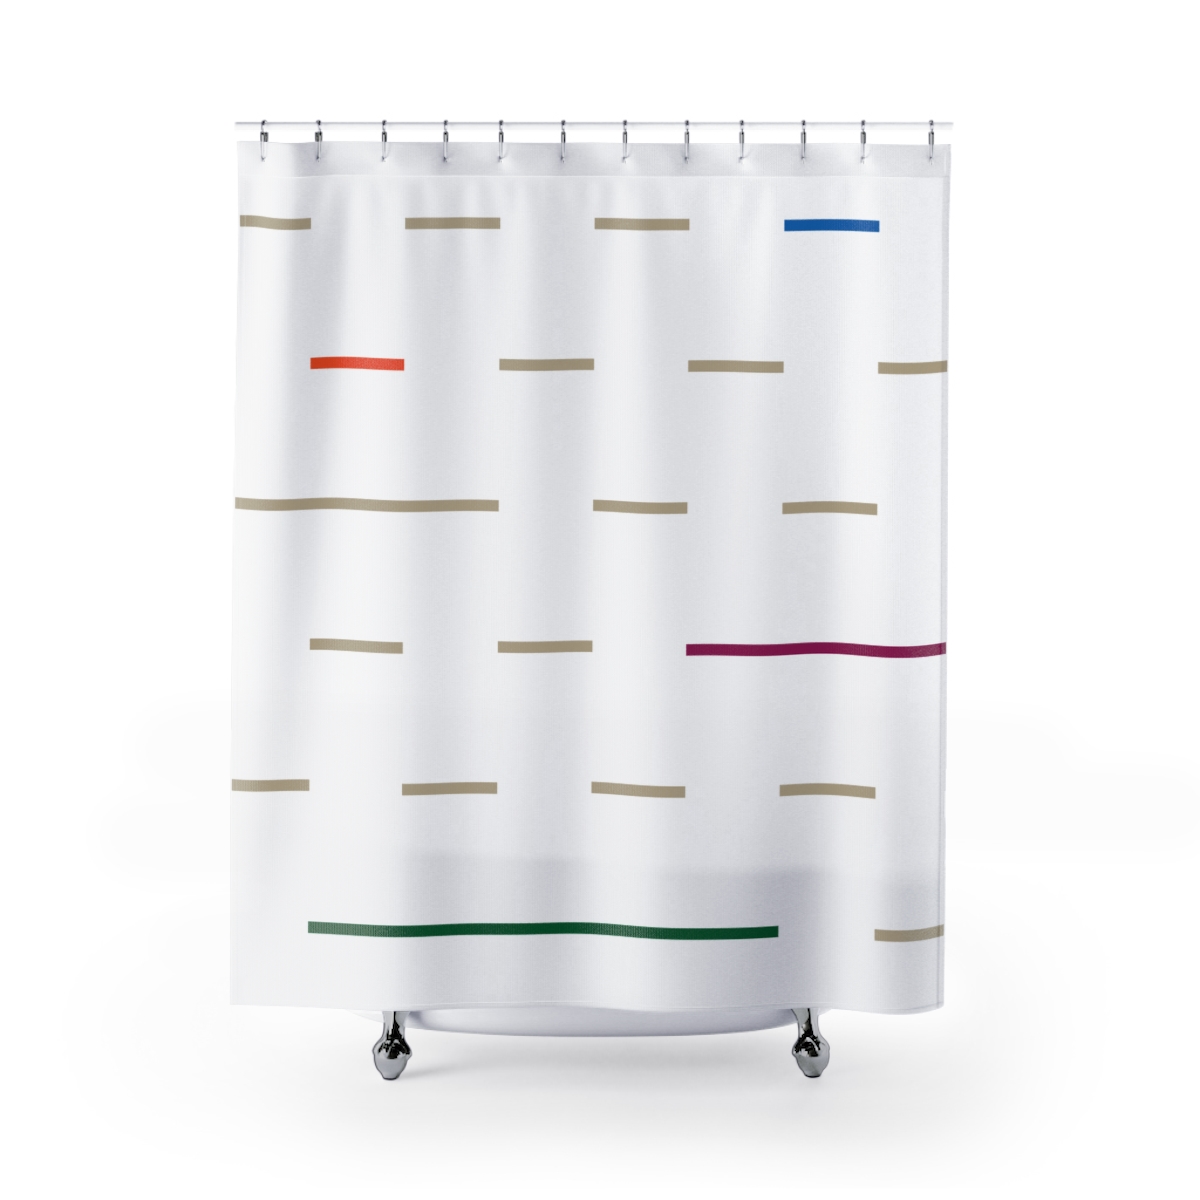 Shower Curtain with Modern Linear Elements – inspired by Fulani blankets